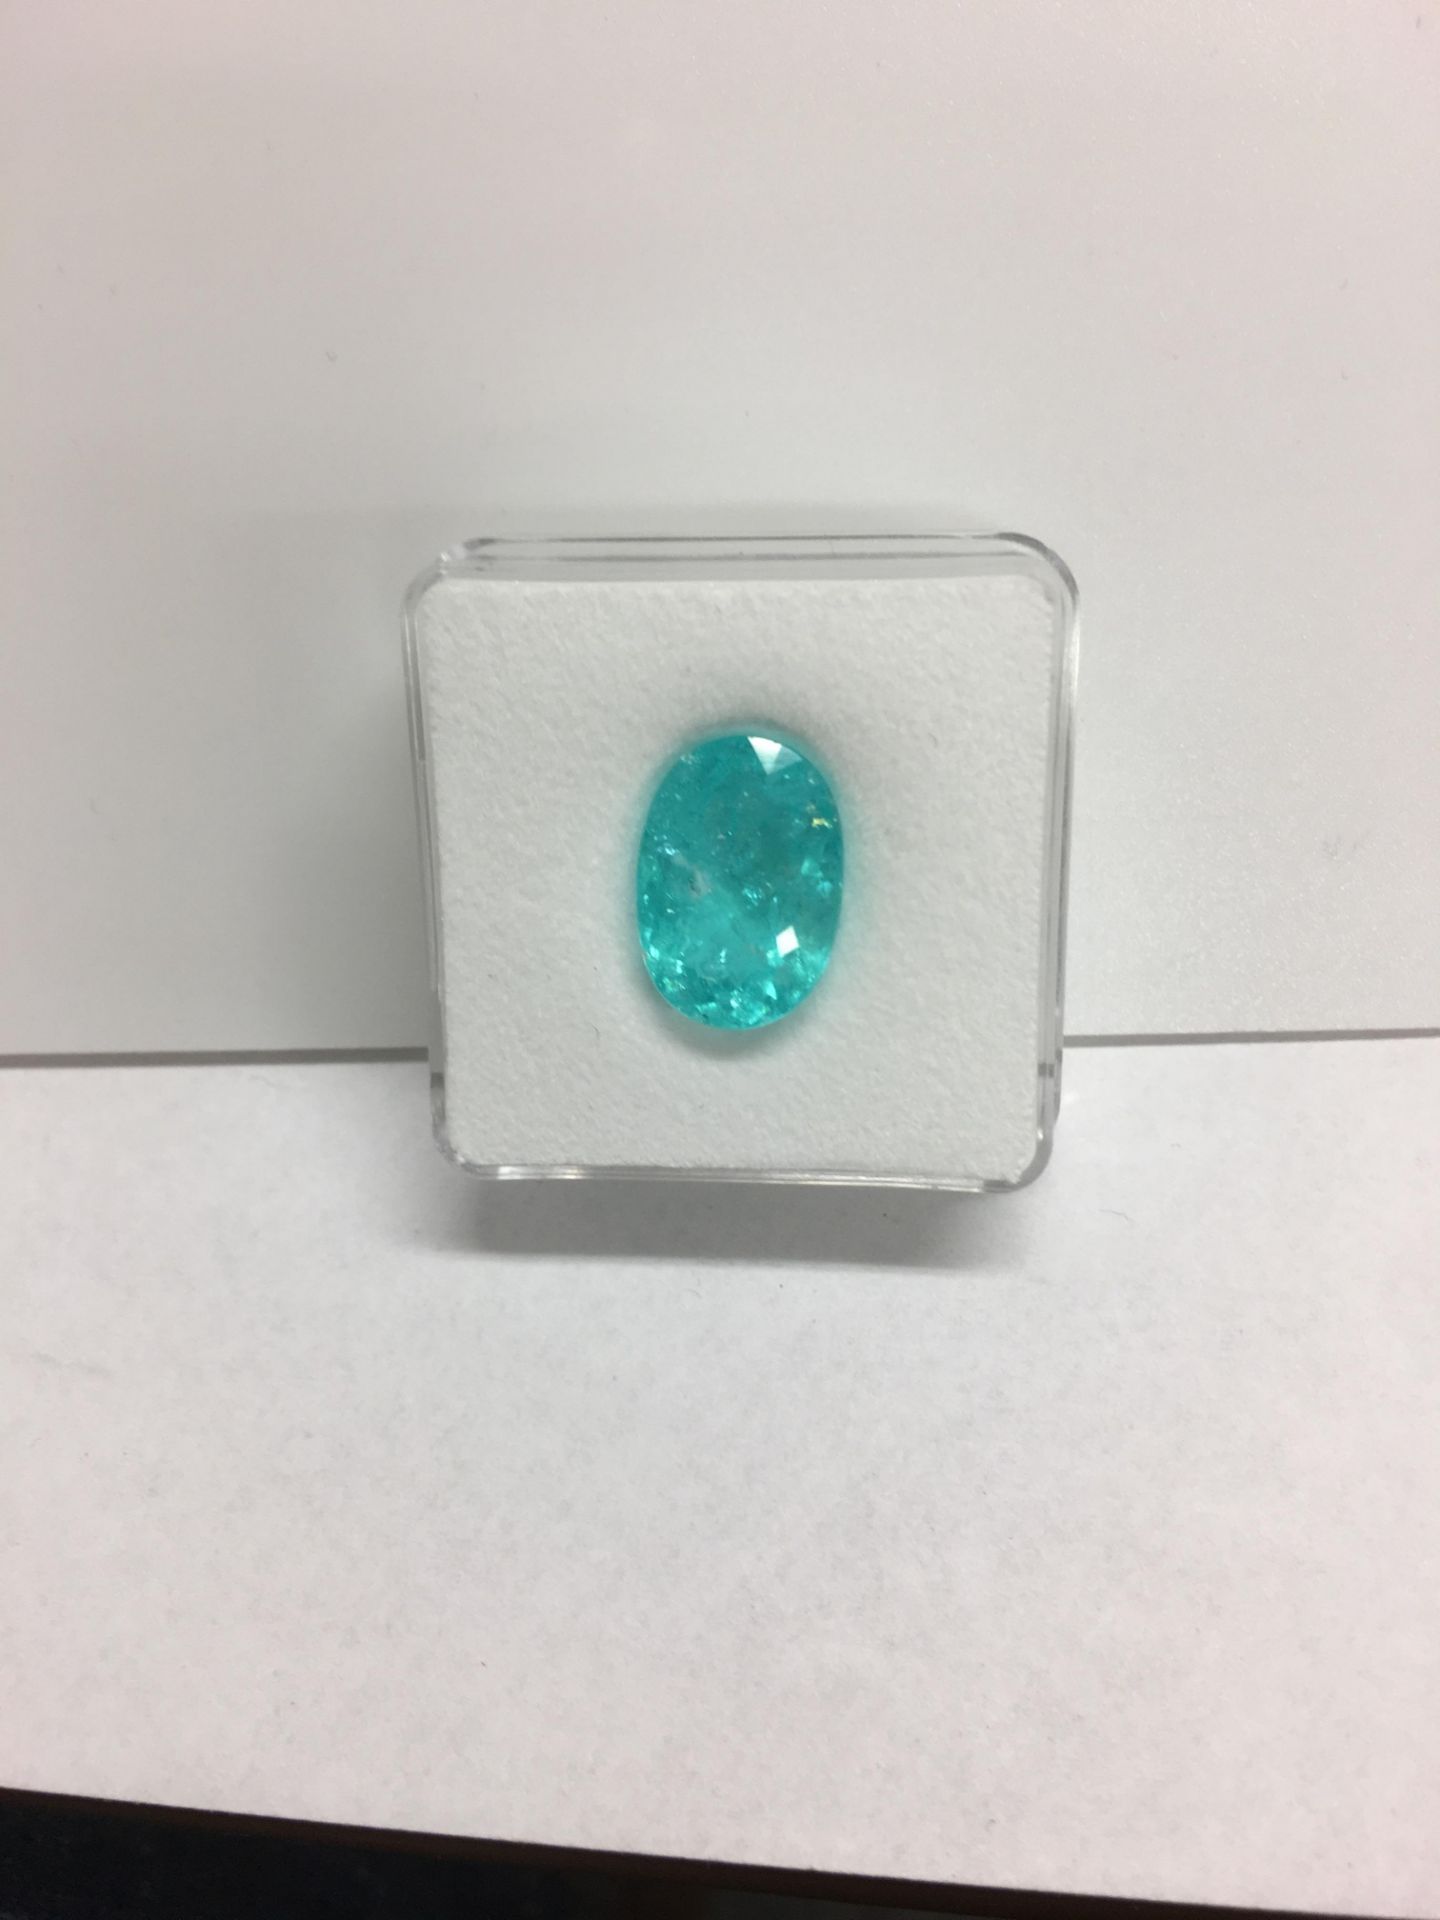 11.05ct Paraiba Tourmaline,16.14mmx 11.44mm x7.87mm,AIGS CERTIFICATION. appriasal 39500 - Image 2 of 5